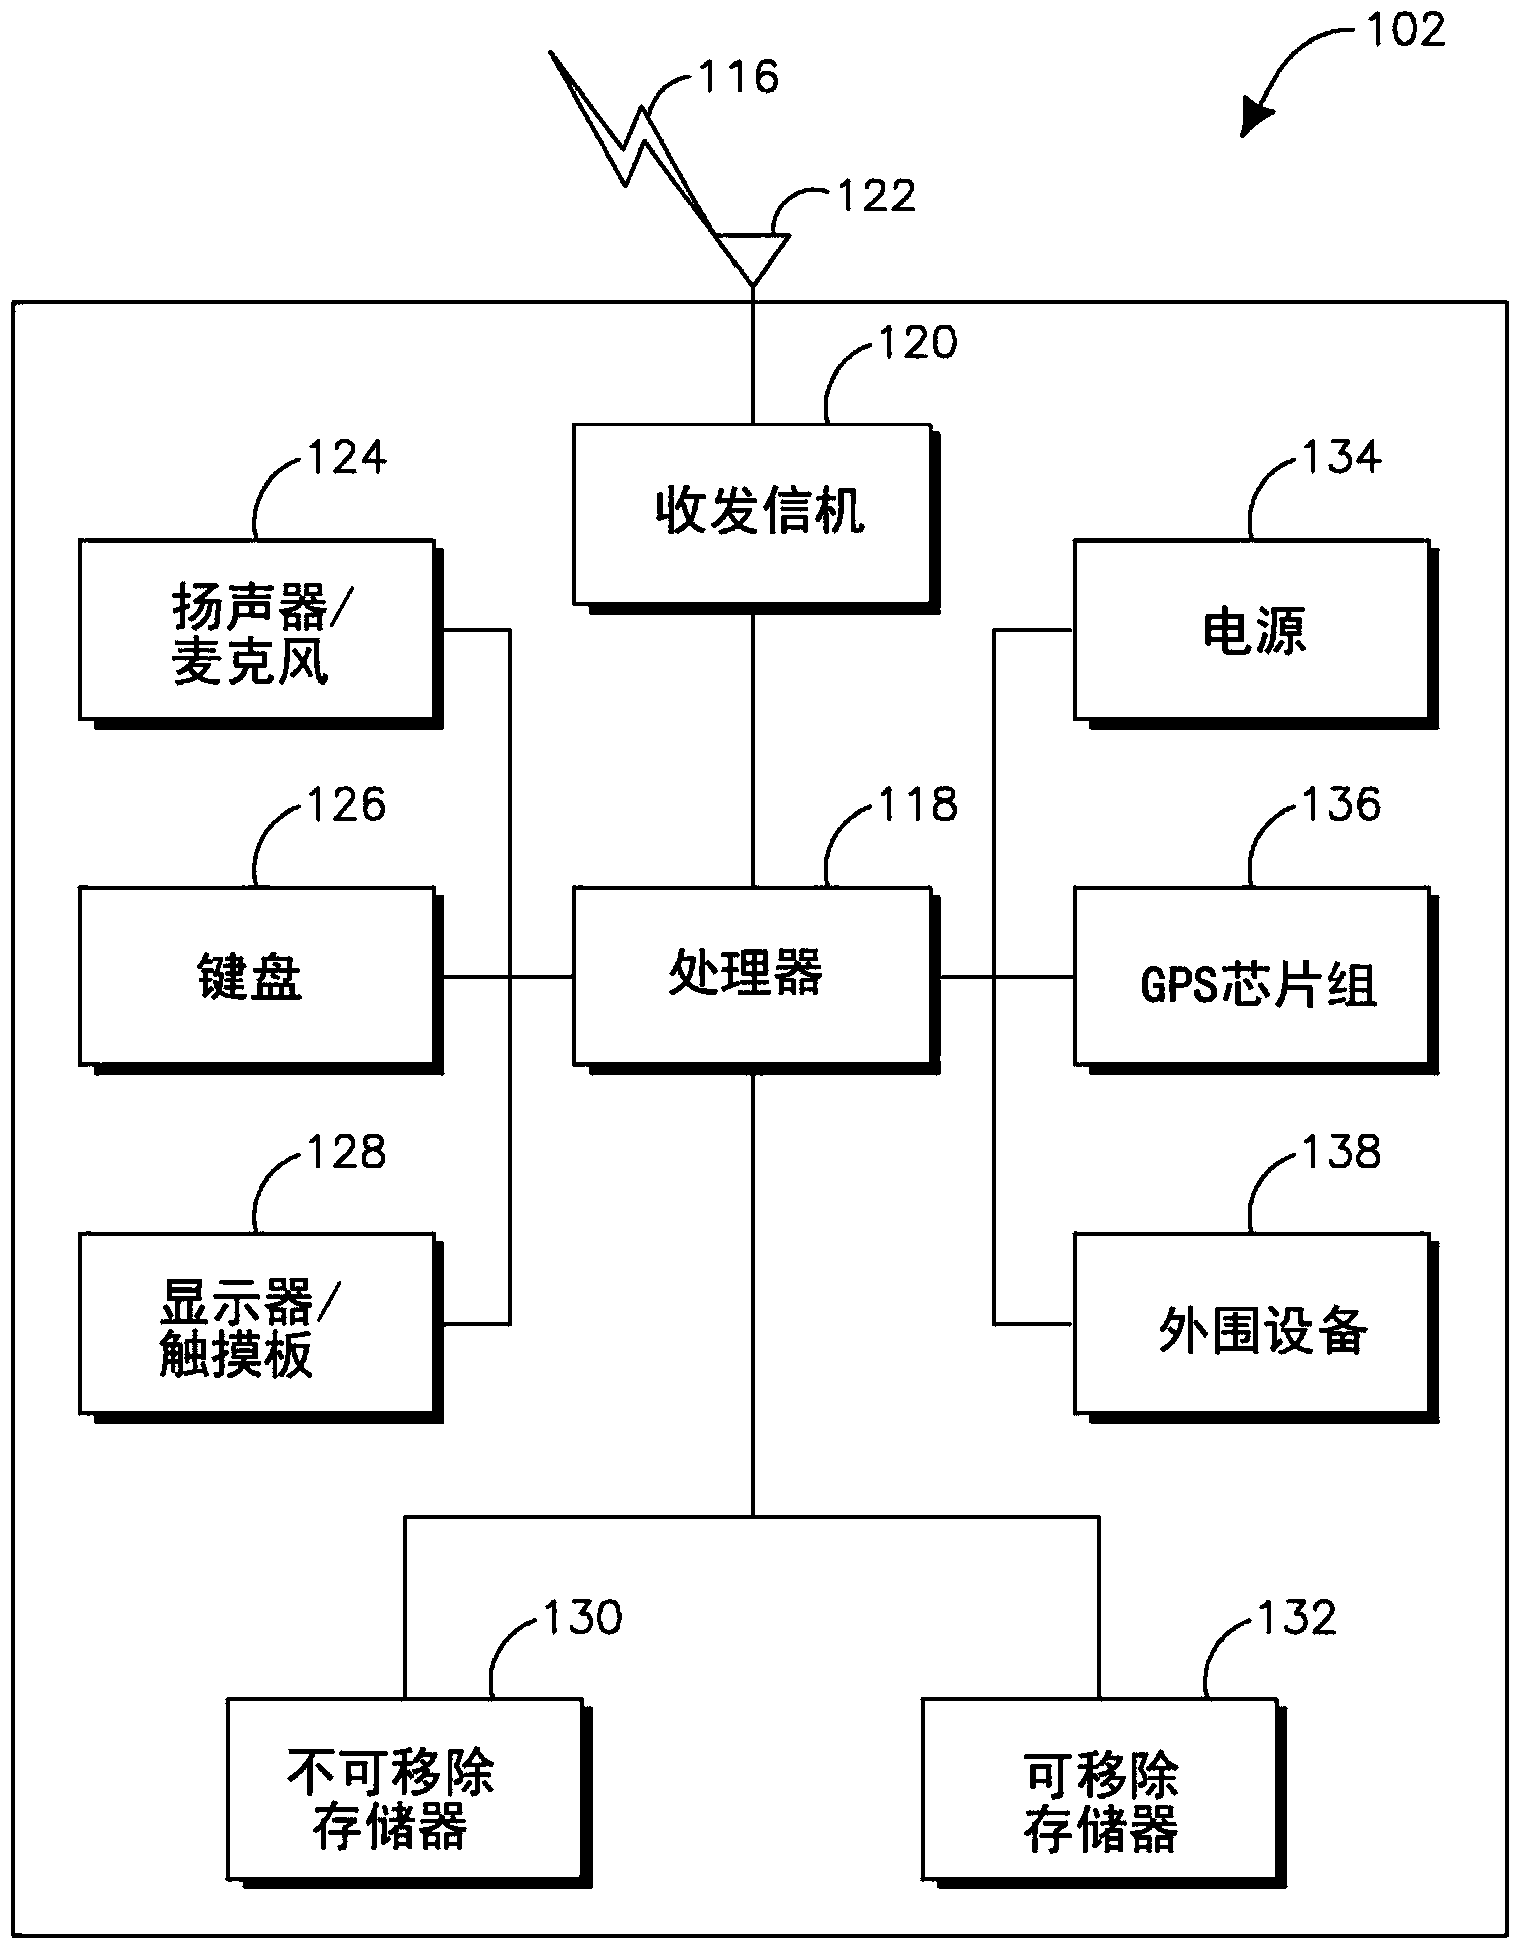 Method and apparatus for millimeter wave communication system